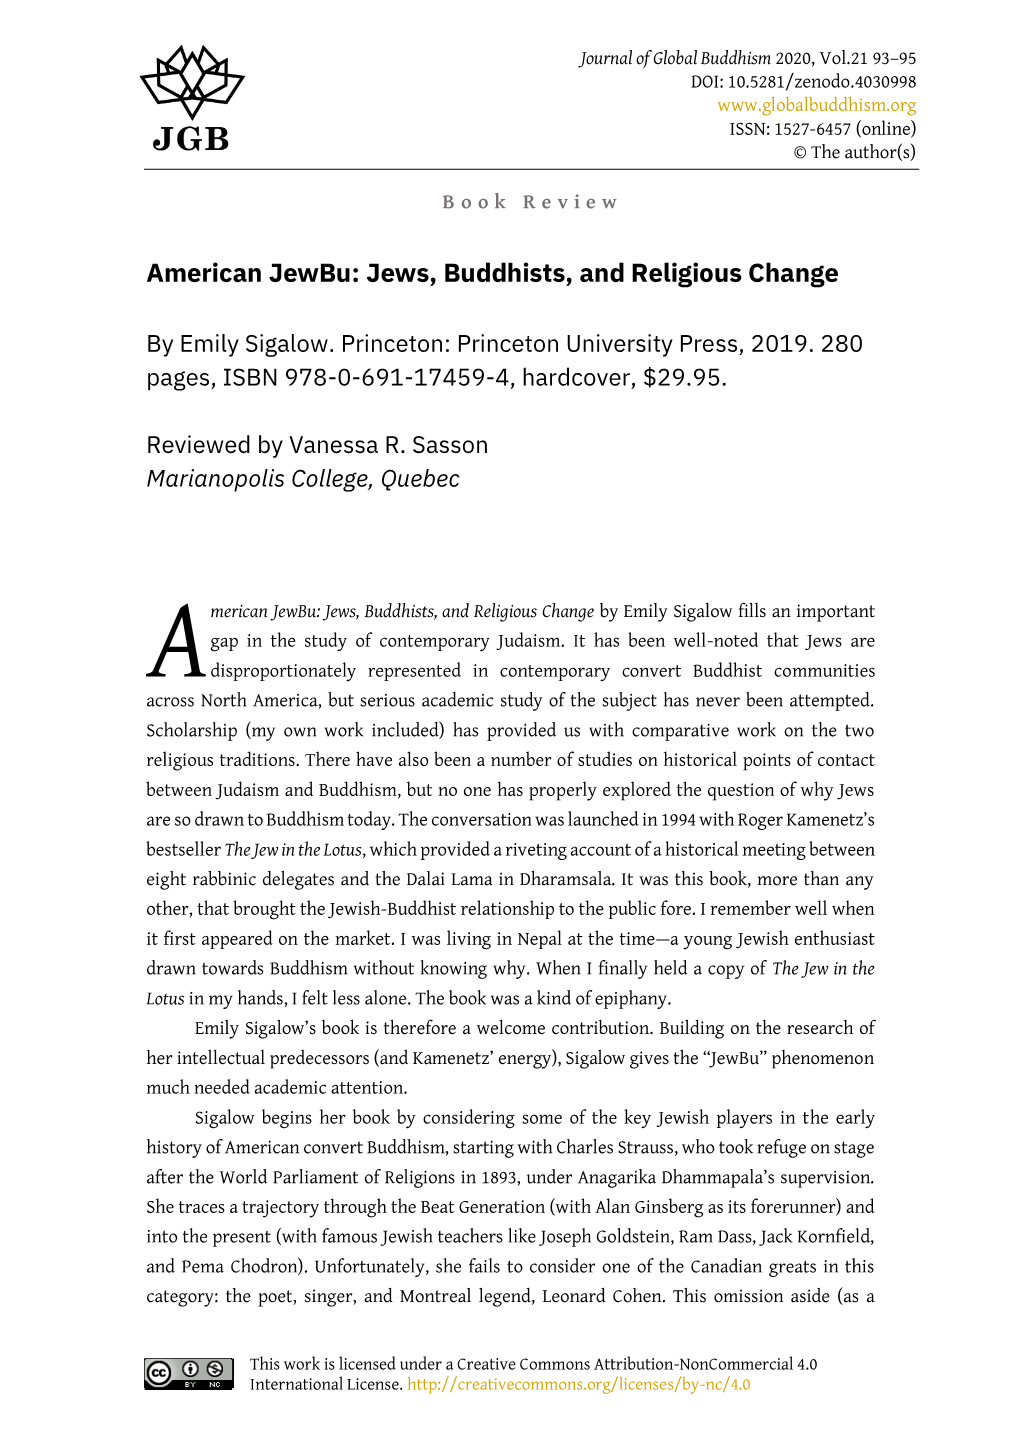 Jews, Buddhists, and Religious Change